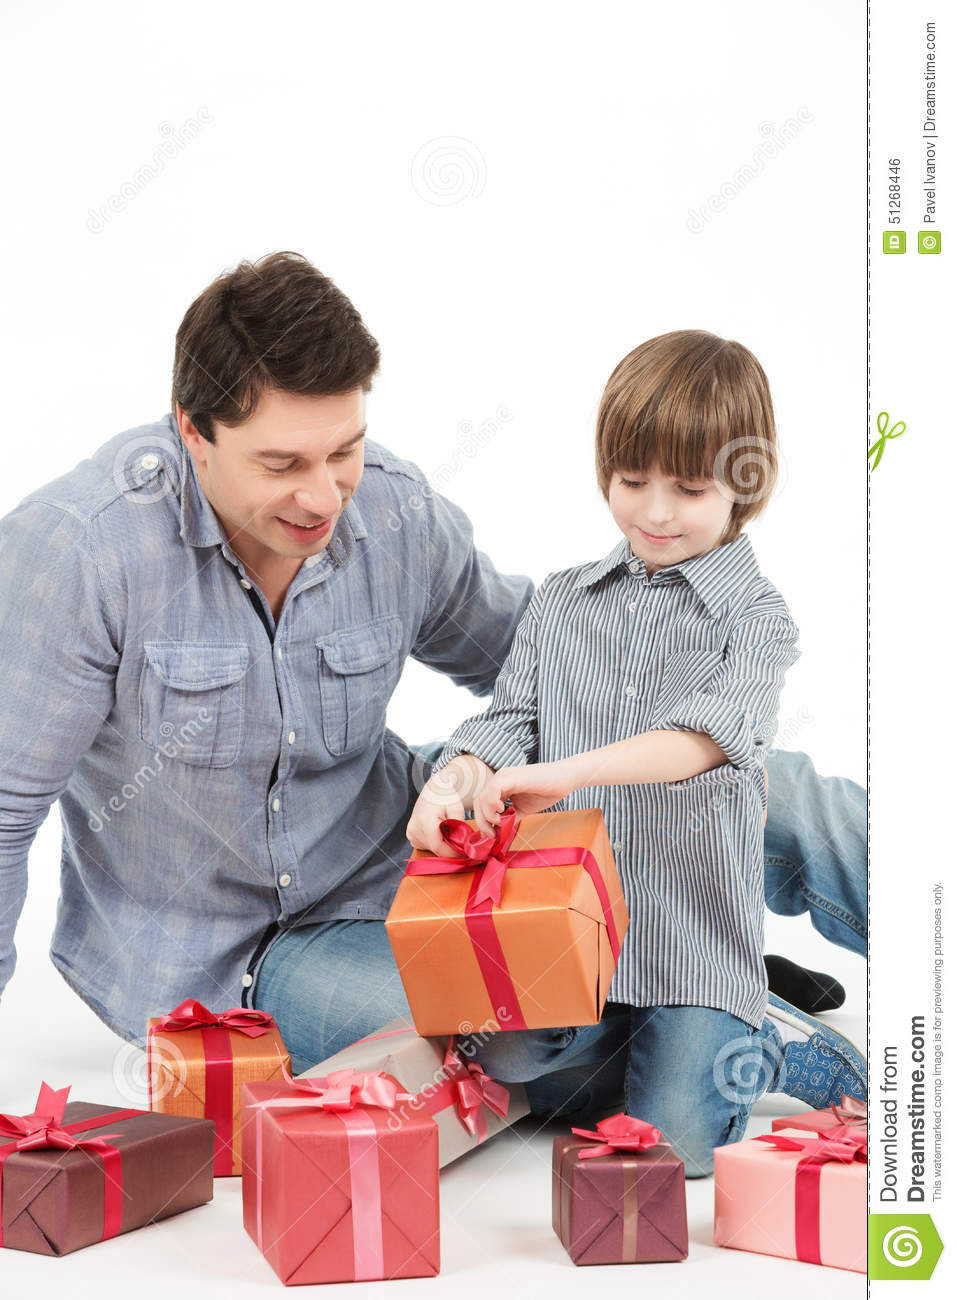 Father Son Christmas Gift Ideas
 Happy Father And Son With Gift Box Stock Image